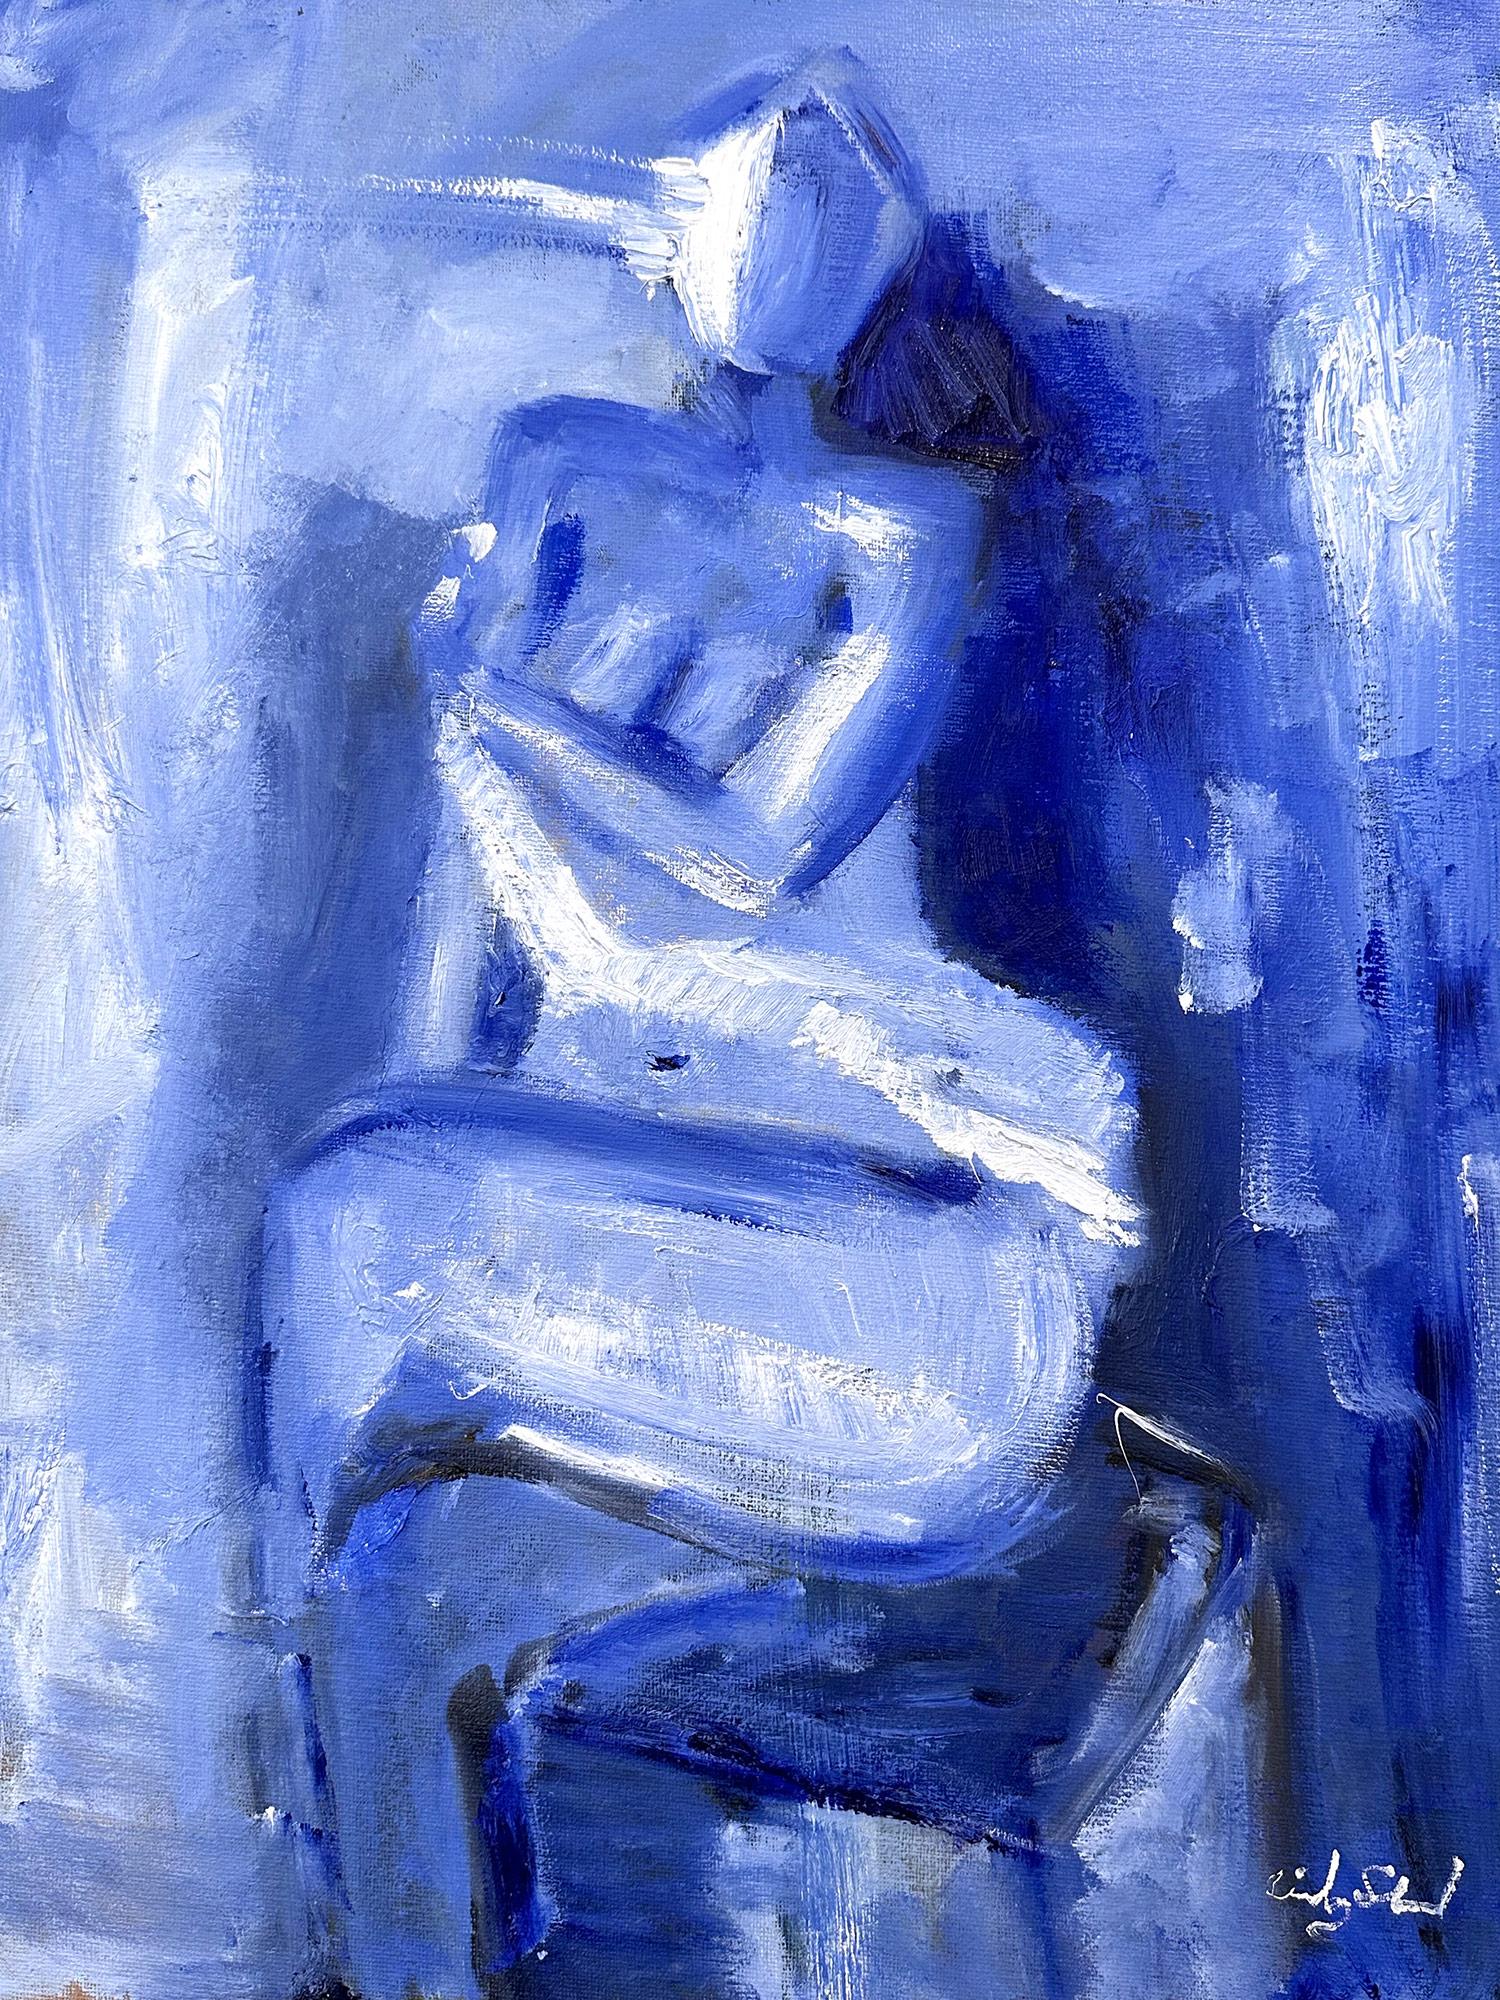 Cindy Shaoul Figurative Painting - "Blue Nude" Modern Abstract Style Modigliani Study Oil Painting on Canvas